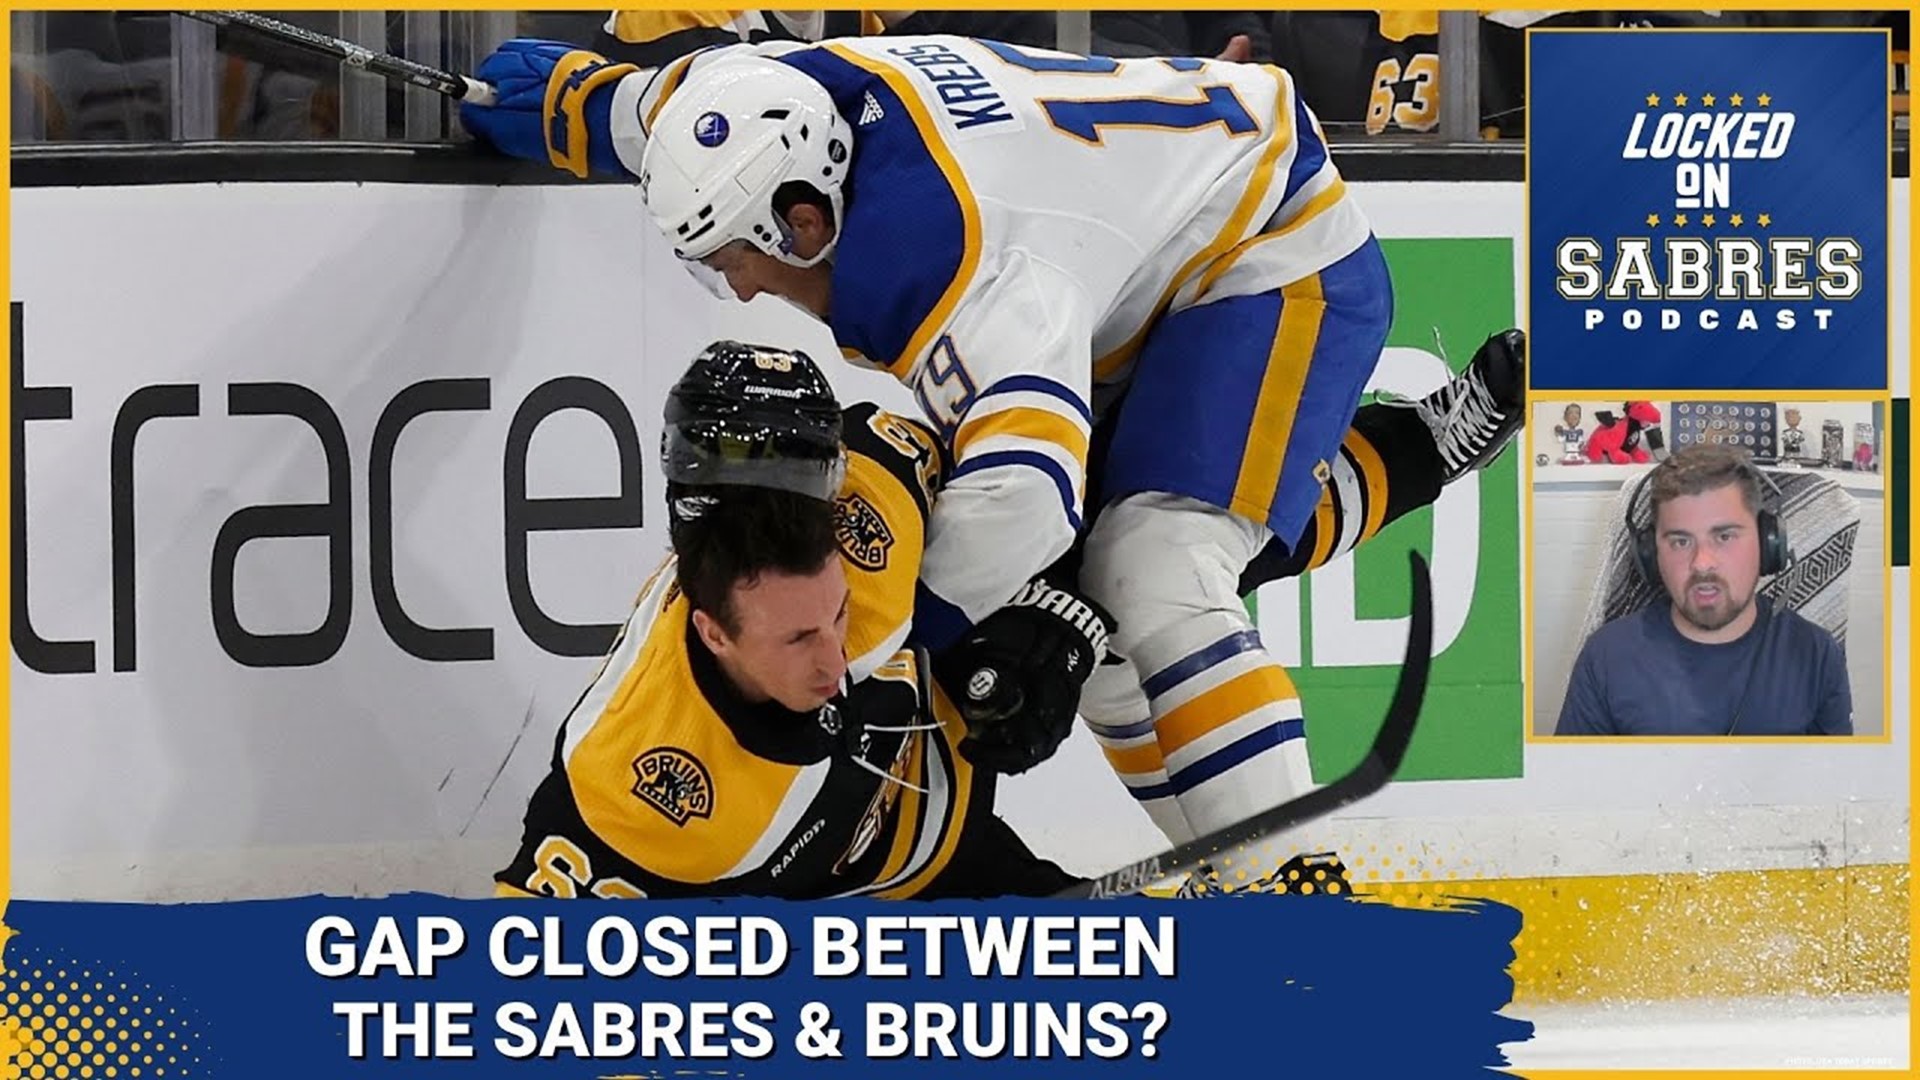 Has the gap closed between the Sabres and Bruins?